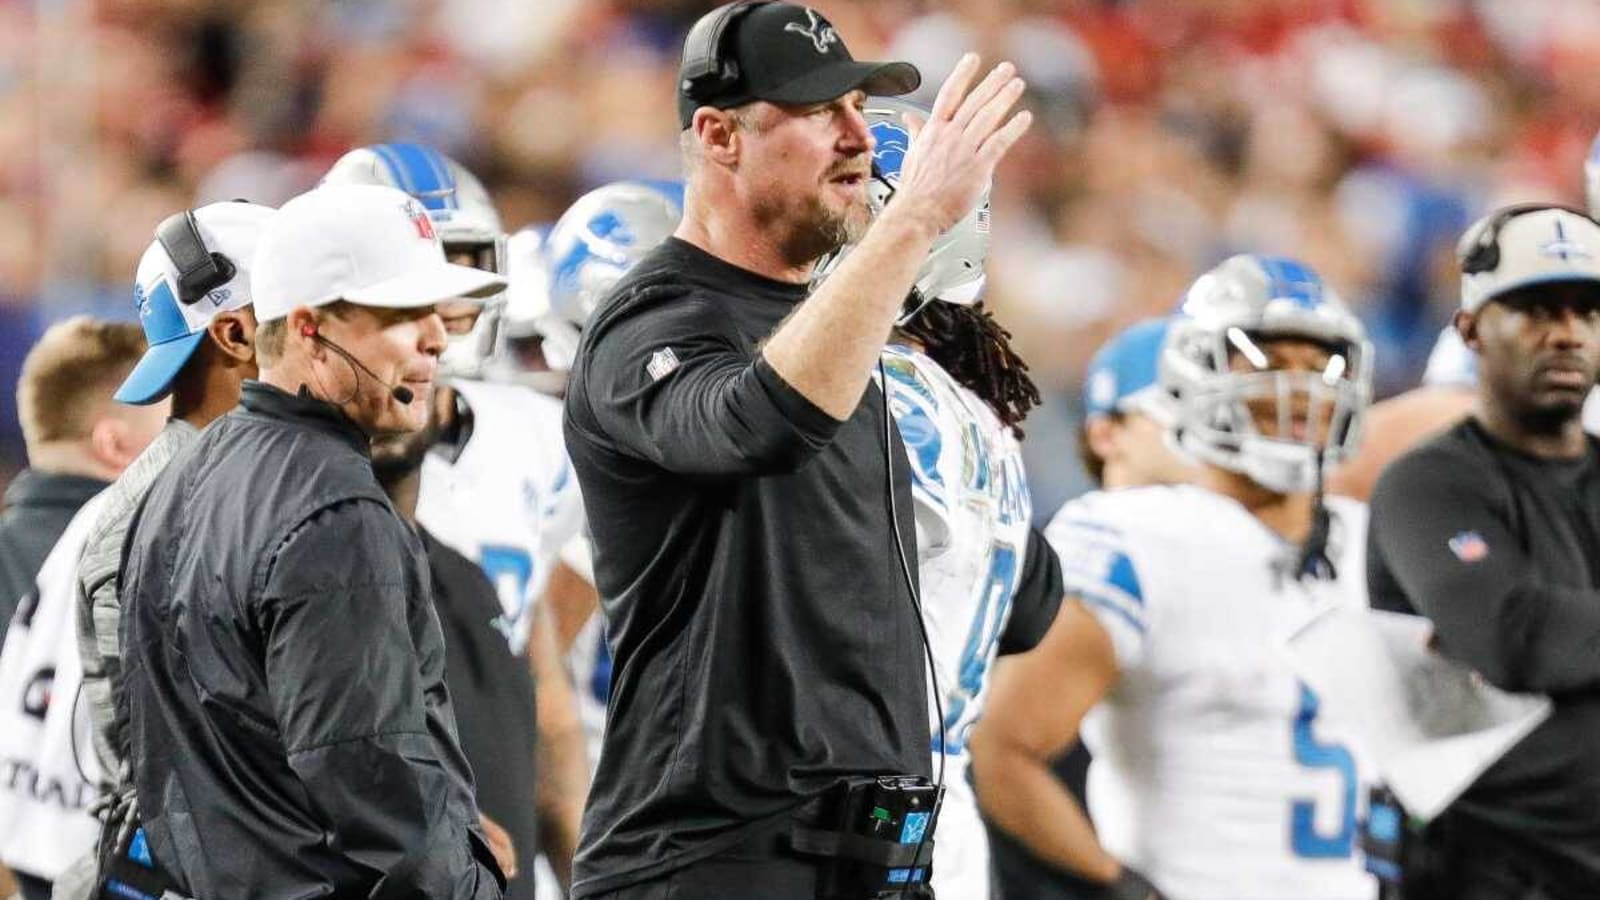 Dan Campbell skipped over again for NFL Coach of the Year despite magical season